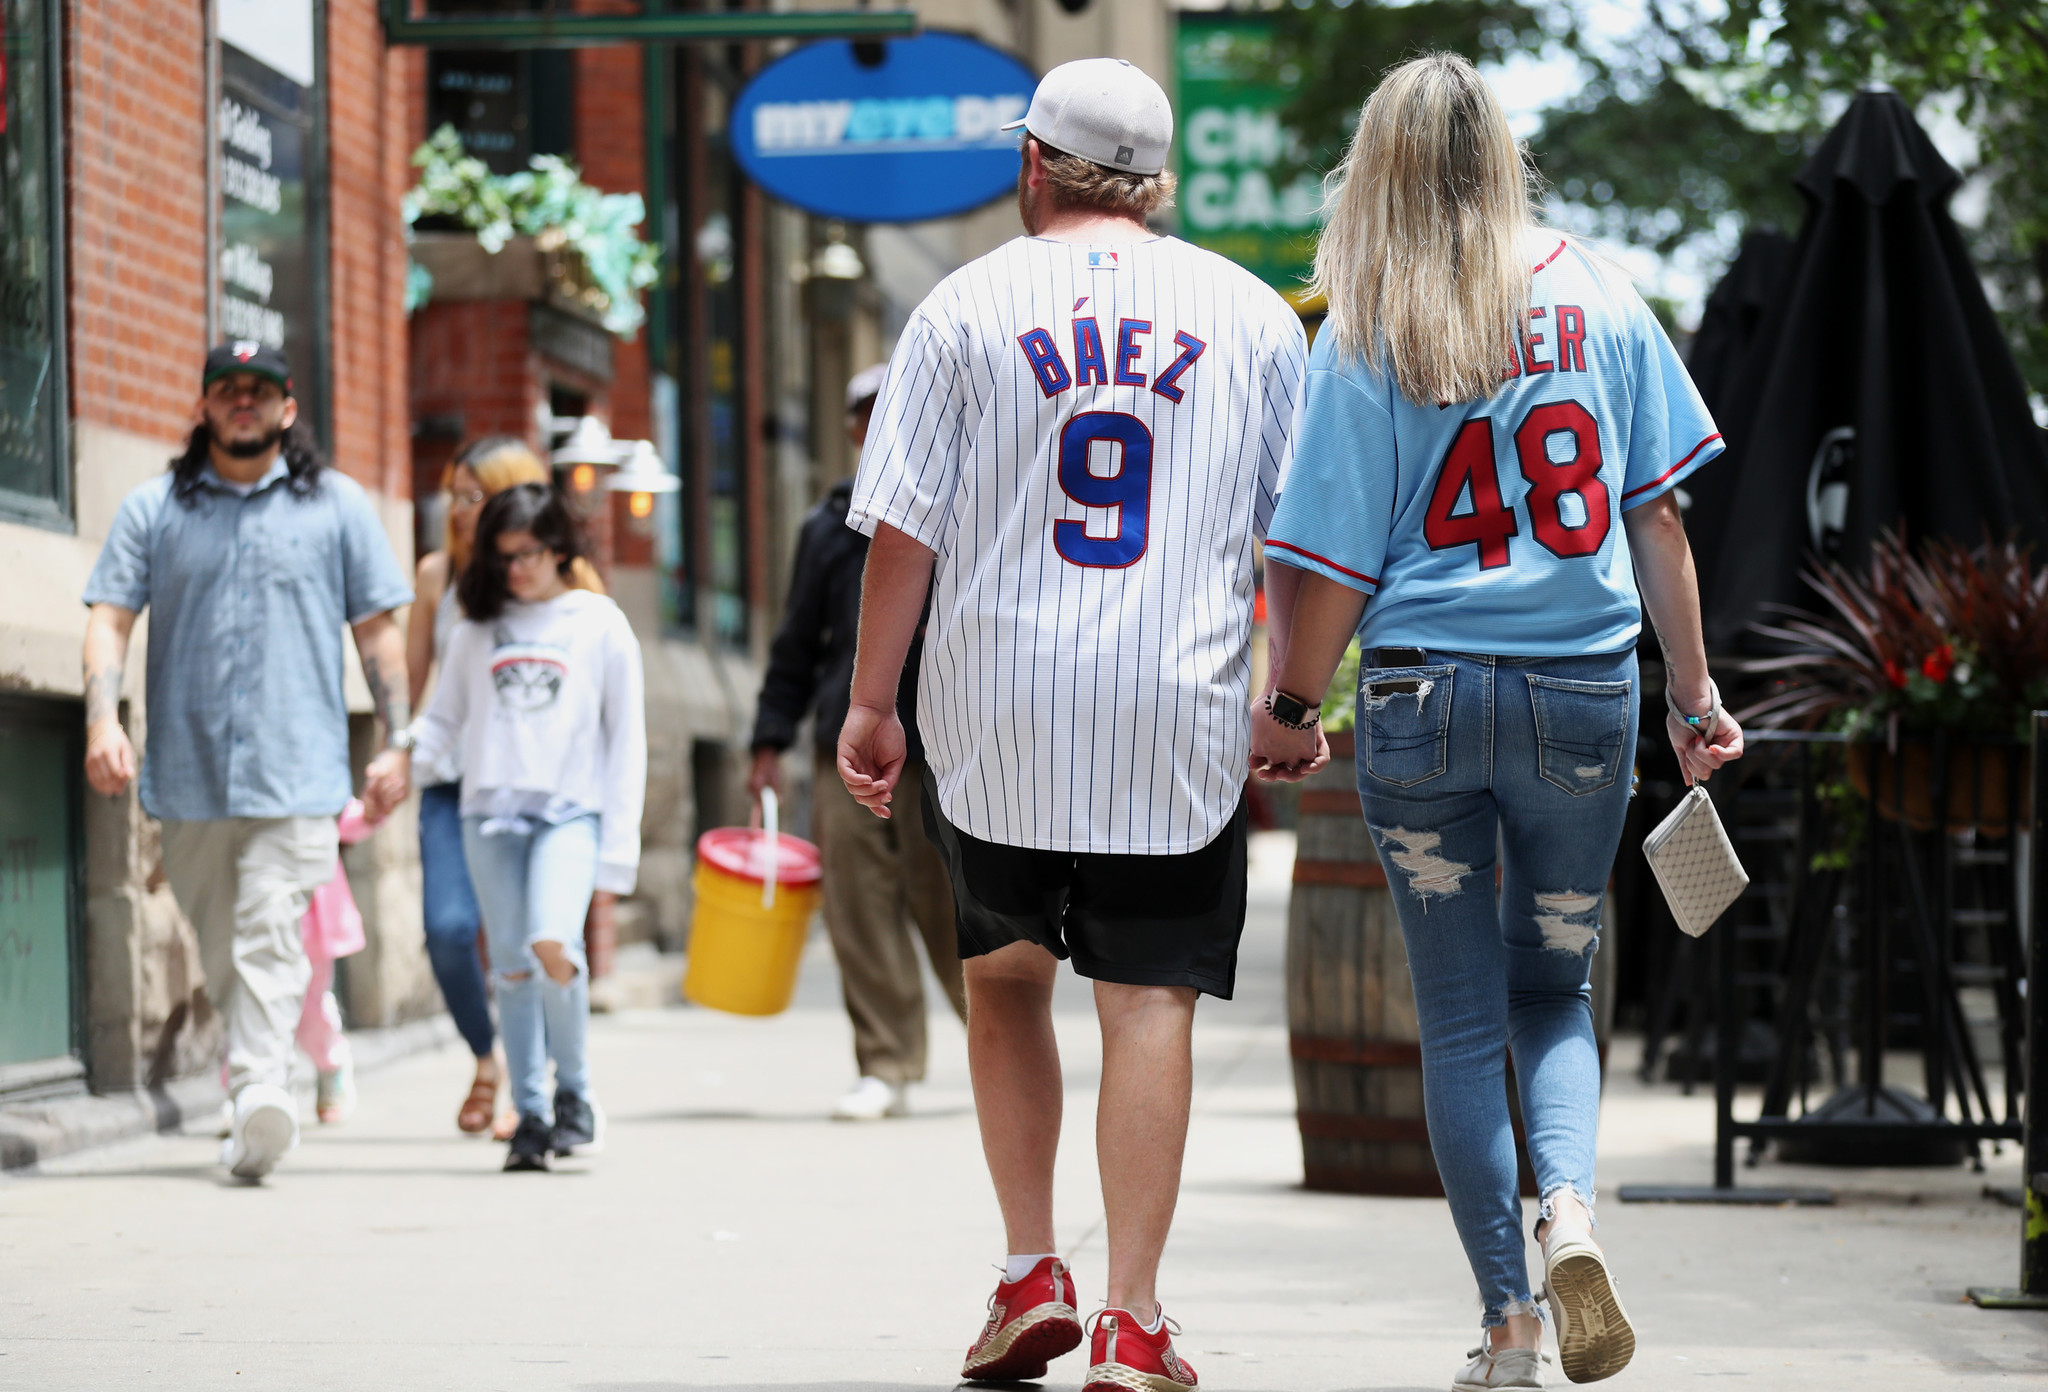 Chicago Tribune: Meet Joe Johnson, the Chicago Cubs fan behind Obvious –  OBVIOUS SHIRTS